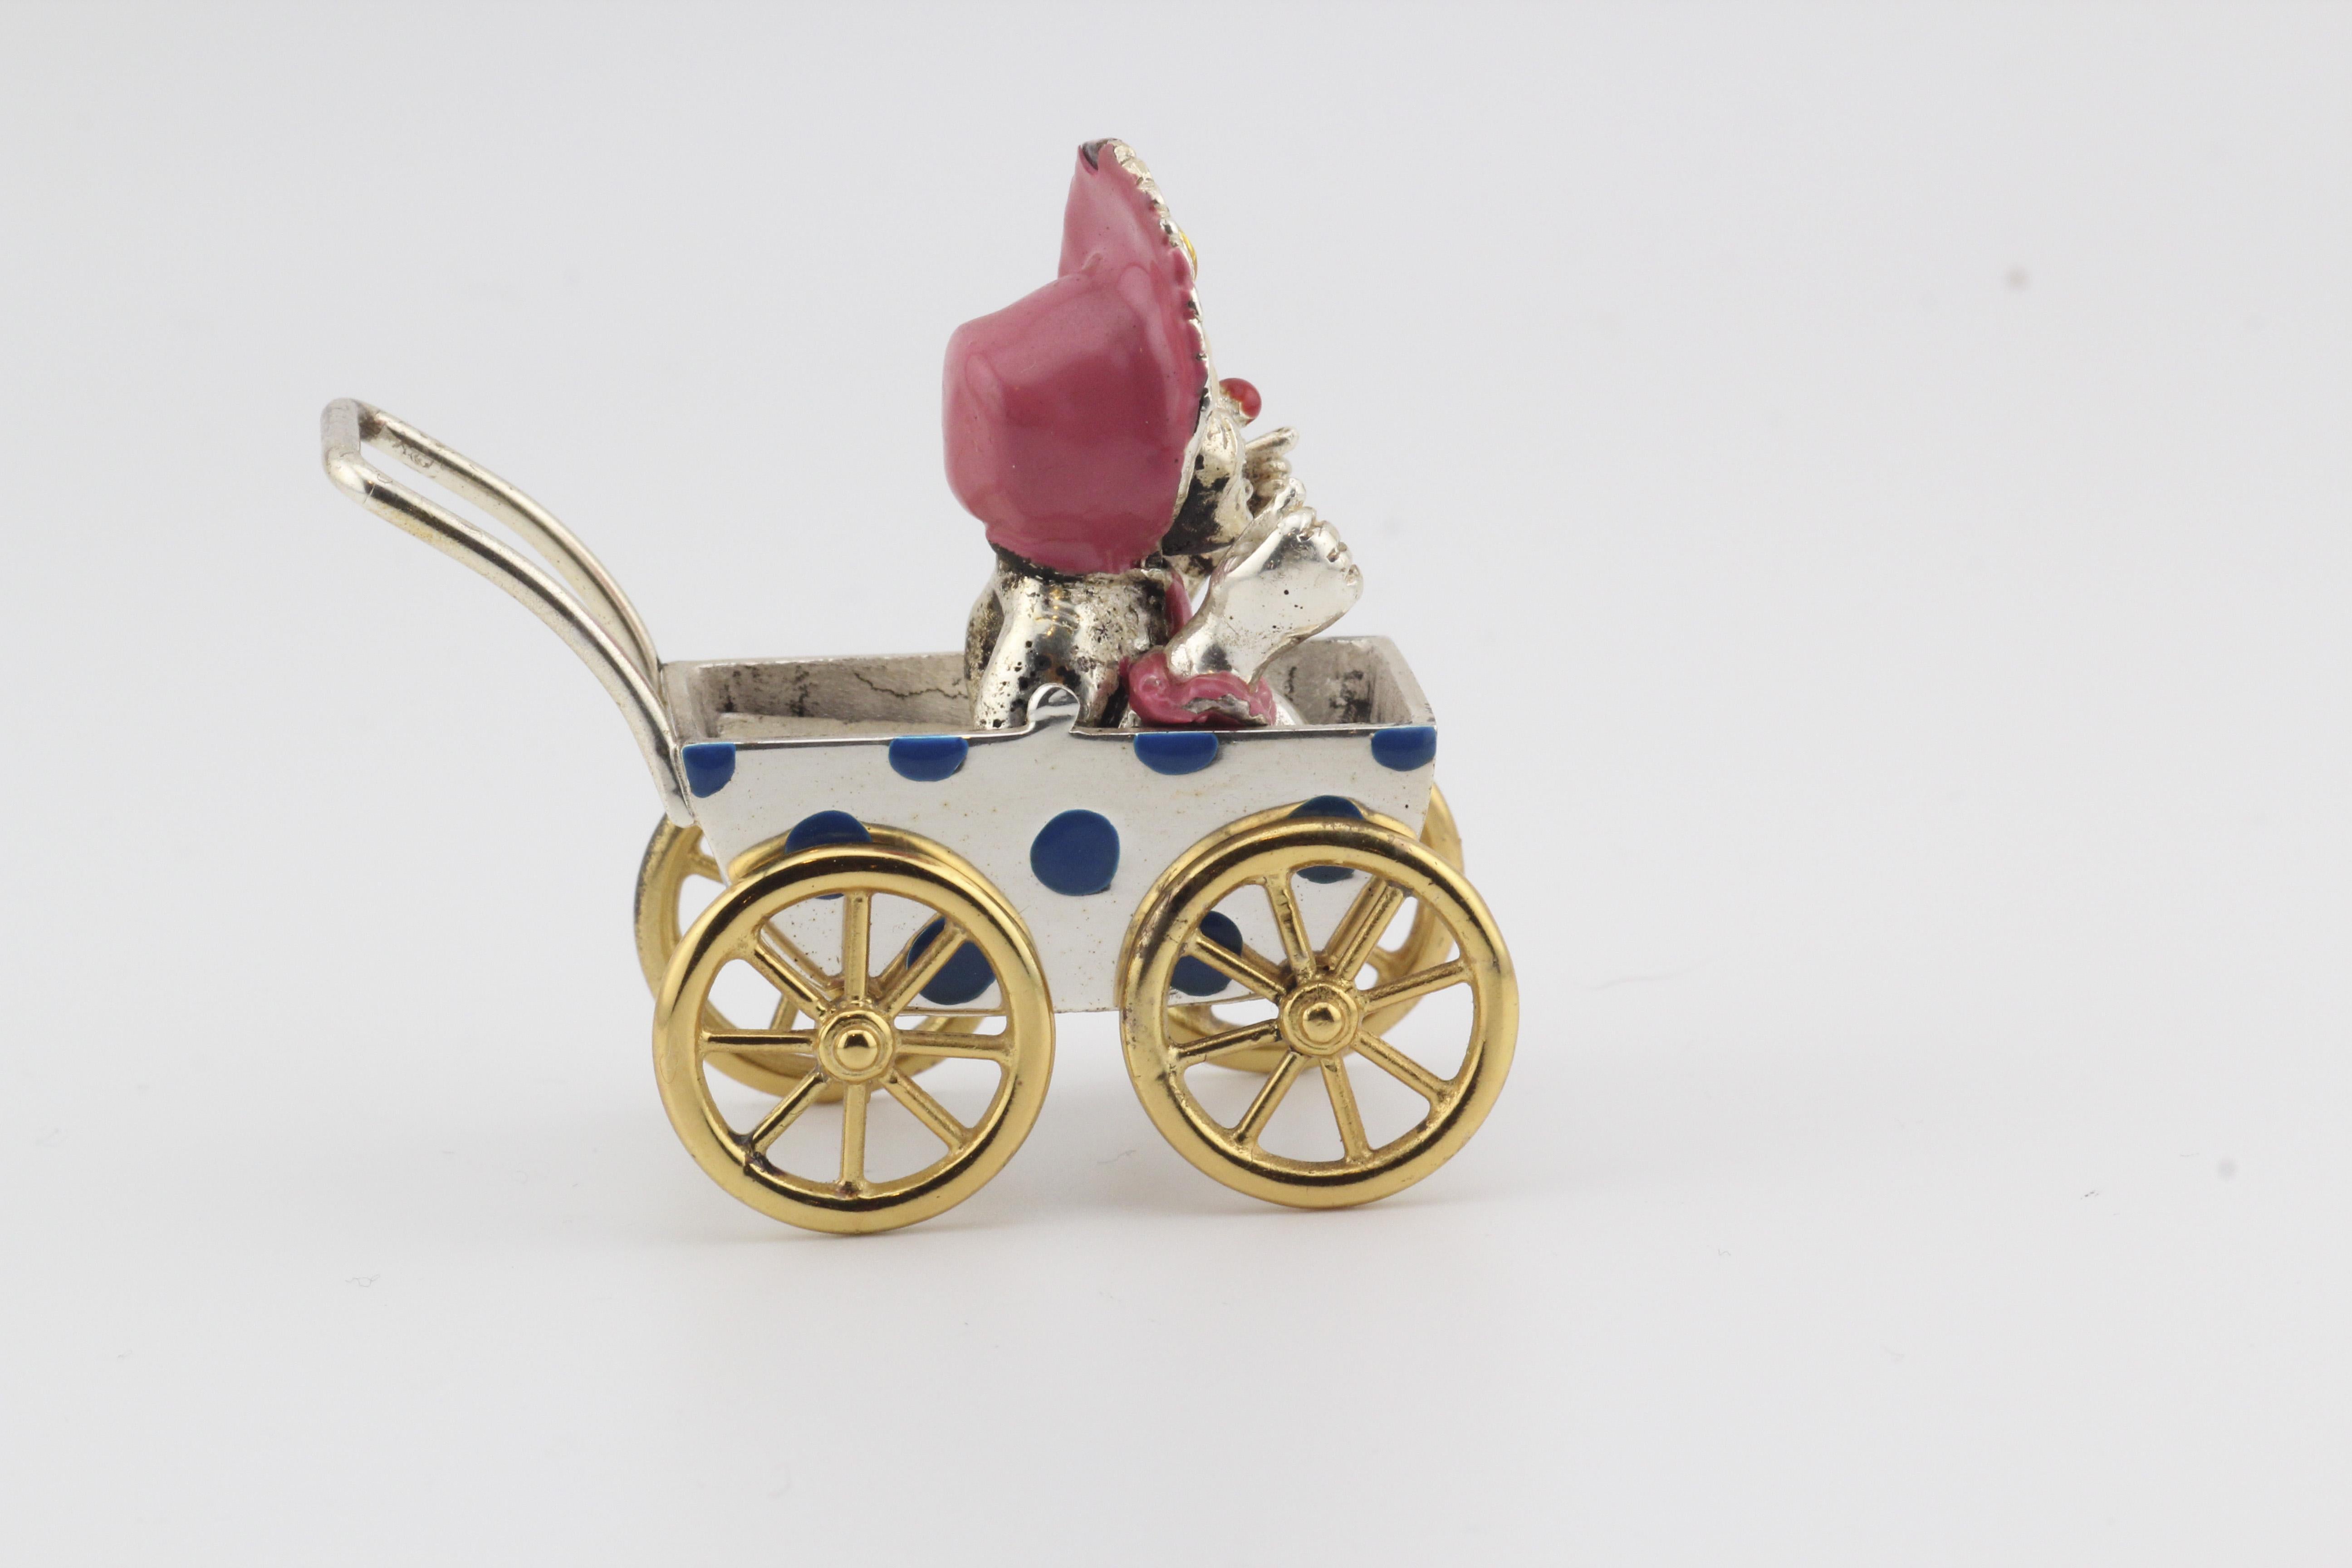 Tiffany & Co. Silver & Enamel Circus Clown Mother & Baby in Carriage Figurine 9